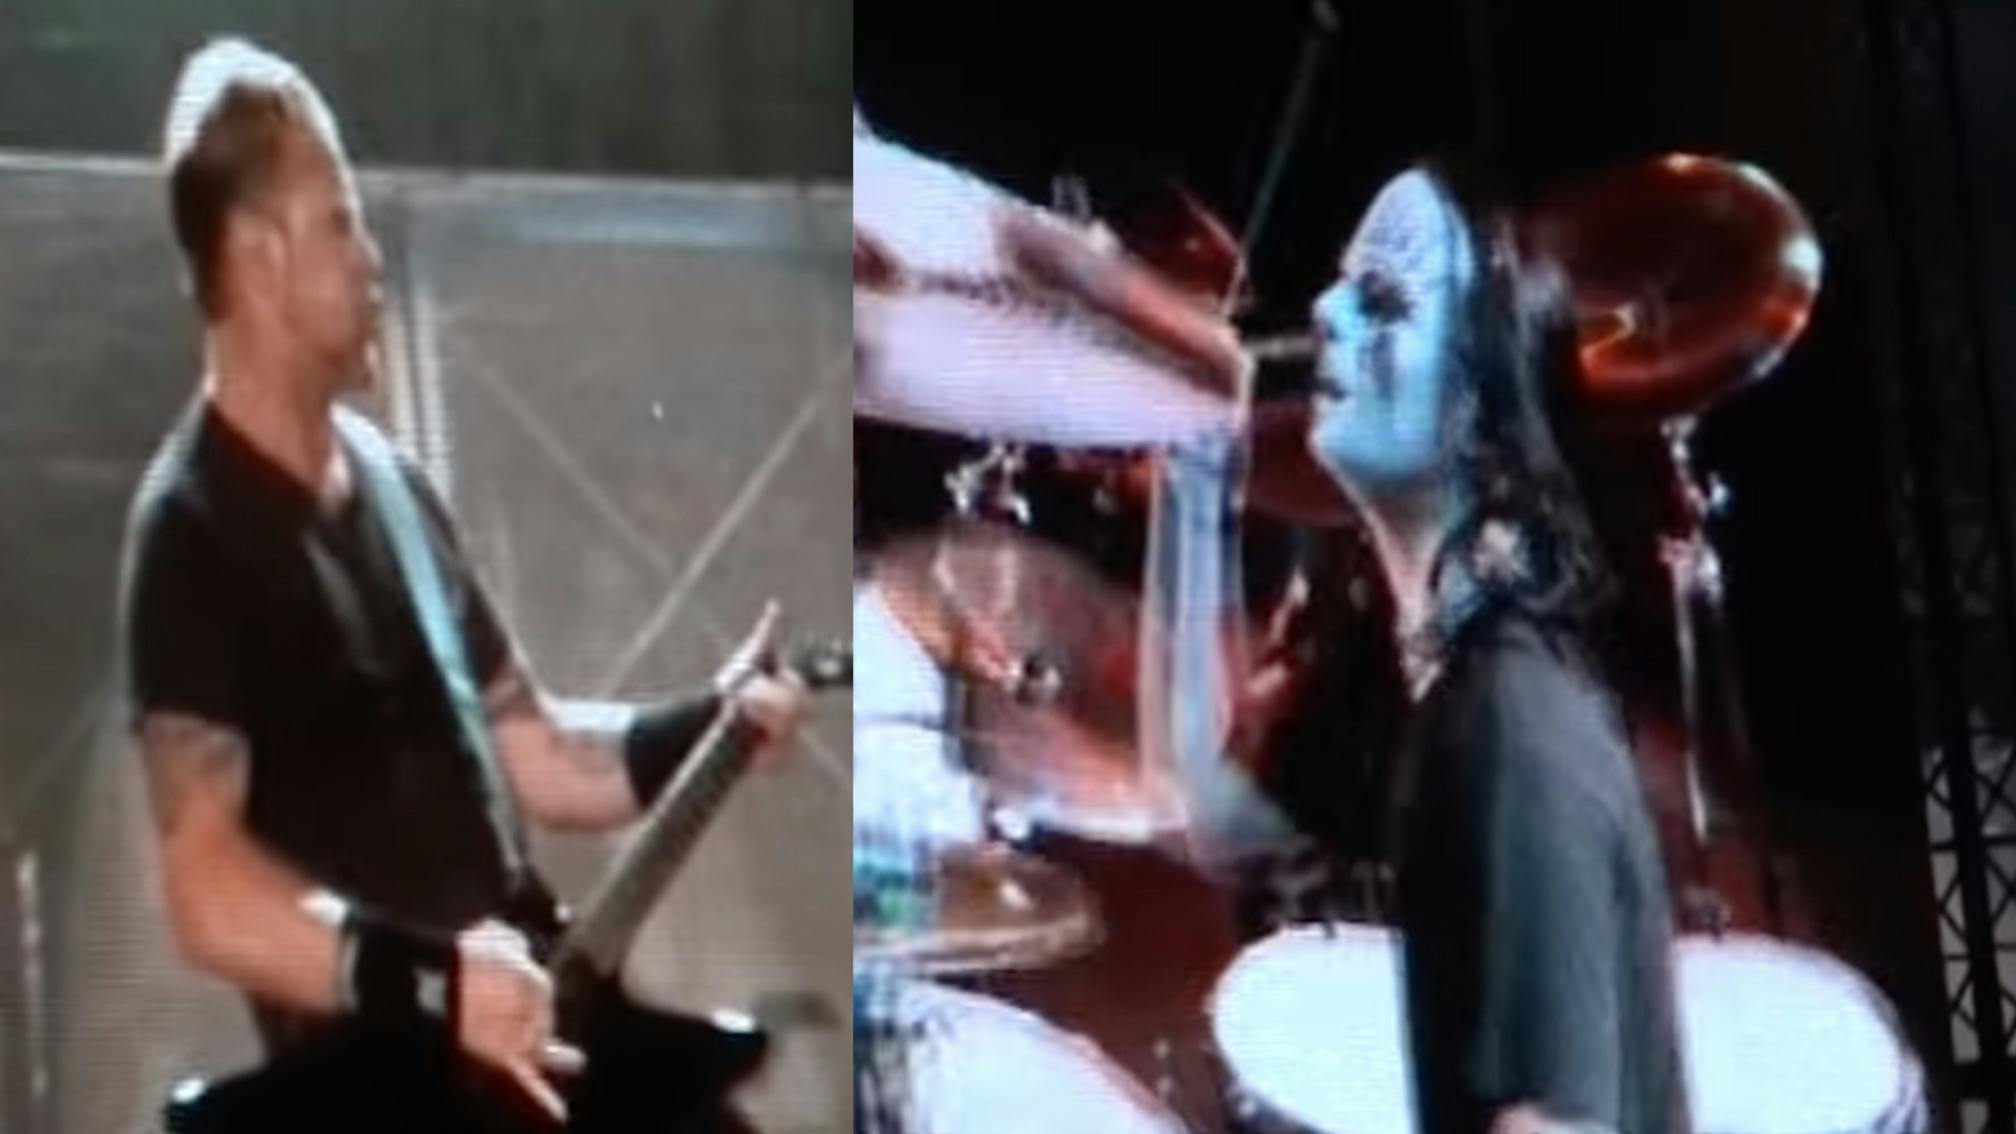 "He saved the day": Download Festival's Andy Copping remembers Joey Jordison's 2004 Metallica set